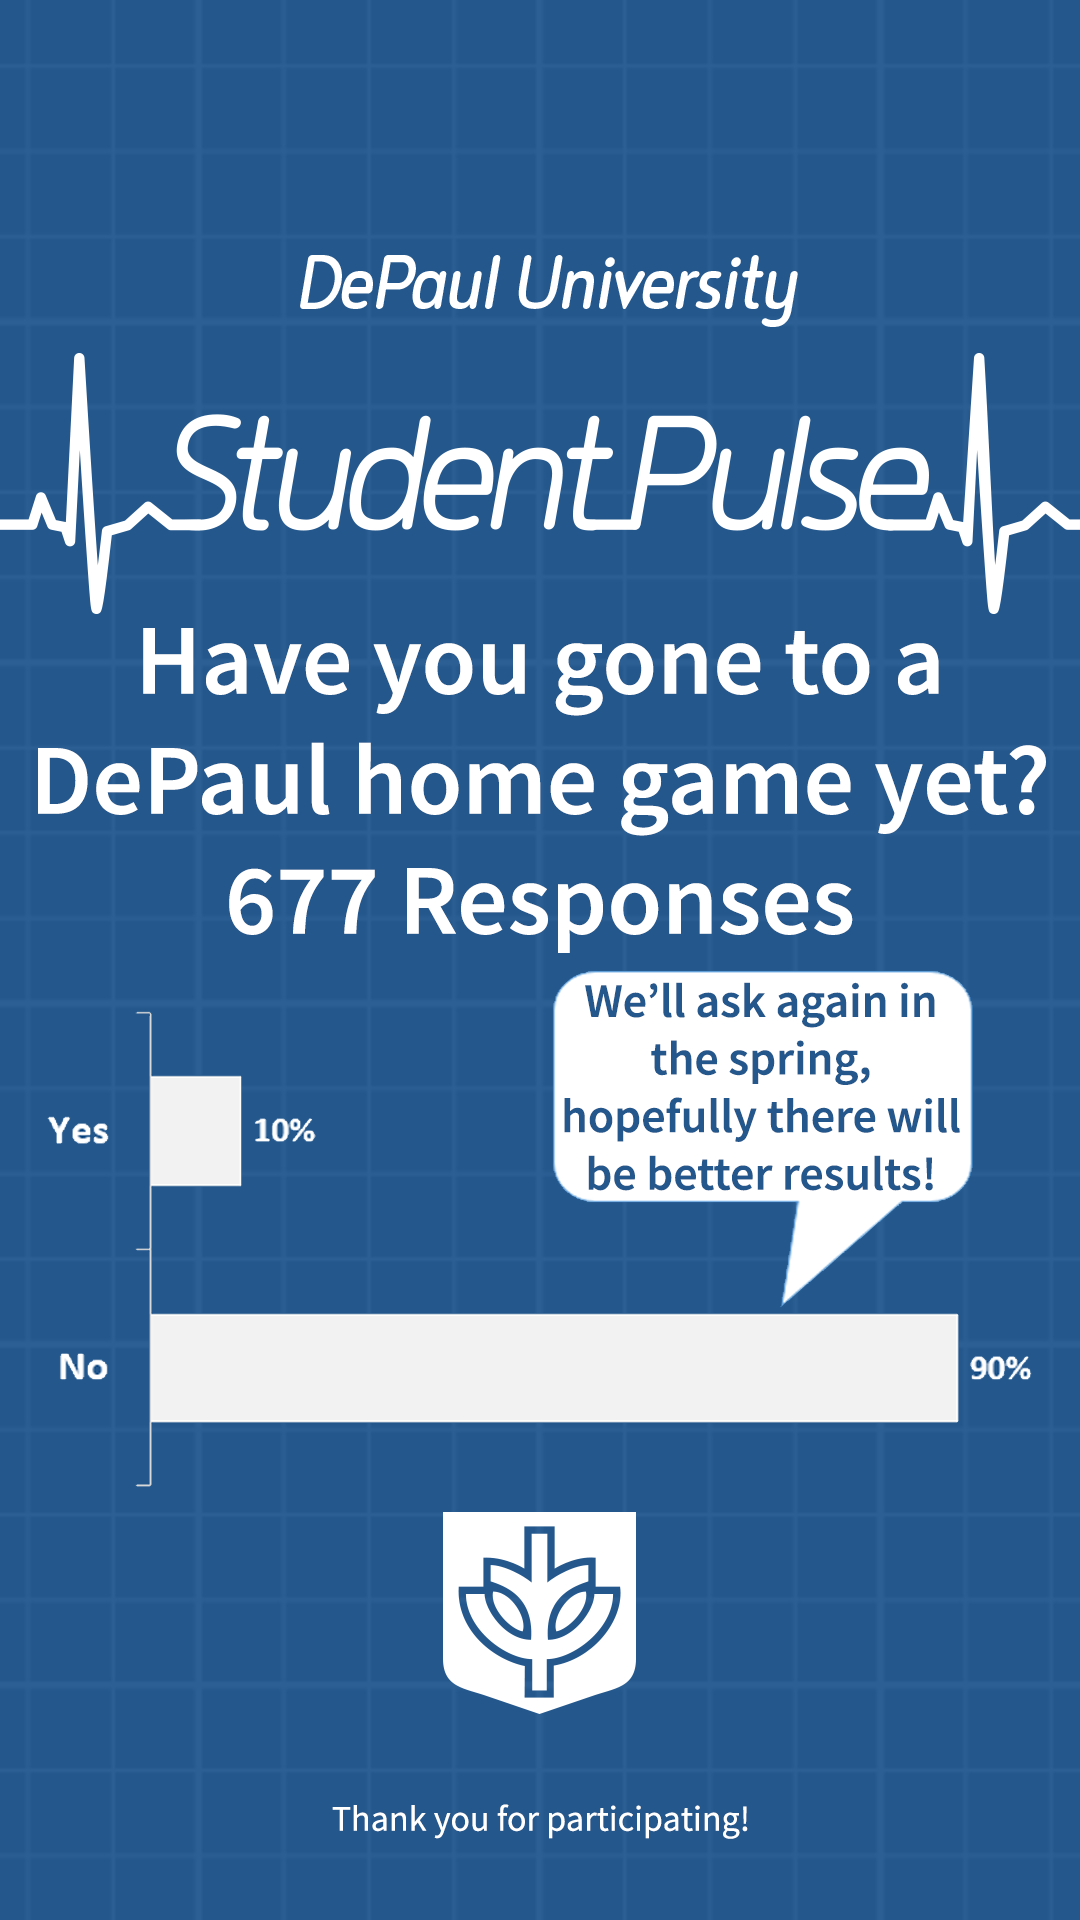 Have you gone to a DePaul home game yet?